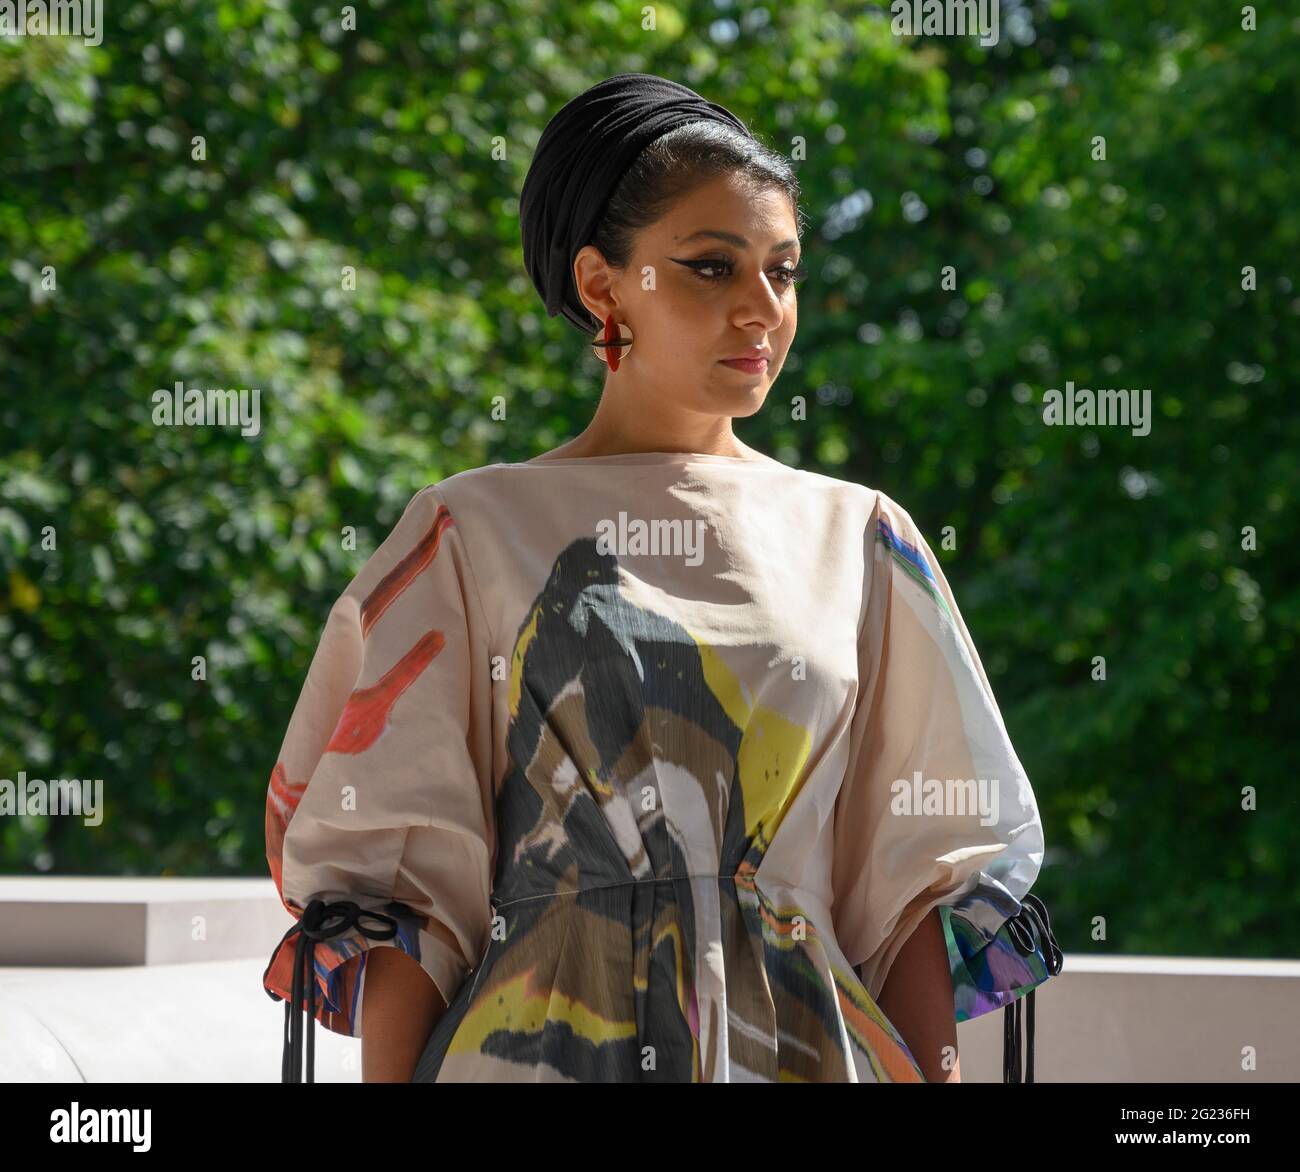 Kensington Gardens, London, UK. 8 June 2021. The 20th Serpentine Pavilion, designed by Johannesburg-based practice Counterspace, directed by Sumayya Vally (pictured) opens in London on 11 June 2021. Credit: Malcolm Park/Alamy Live News. Stock Photo